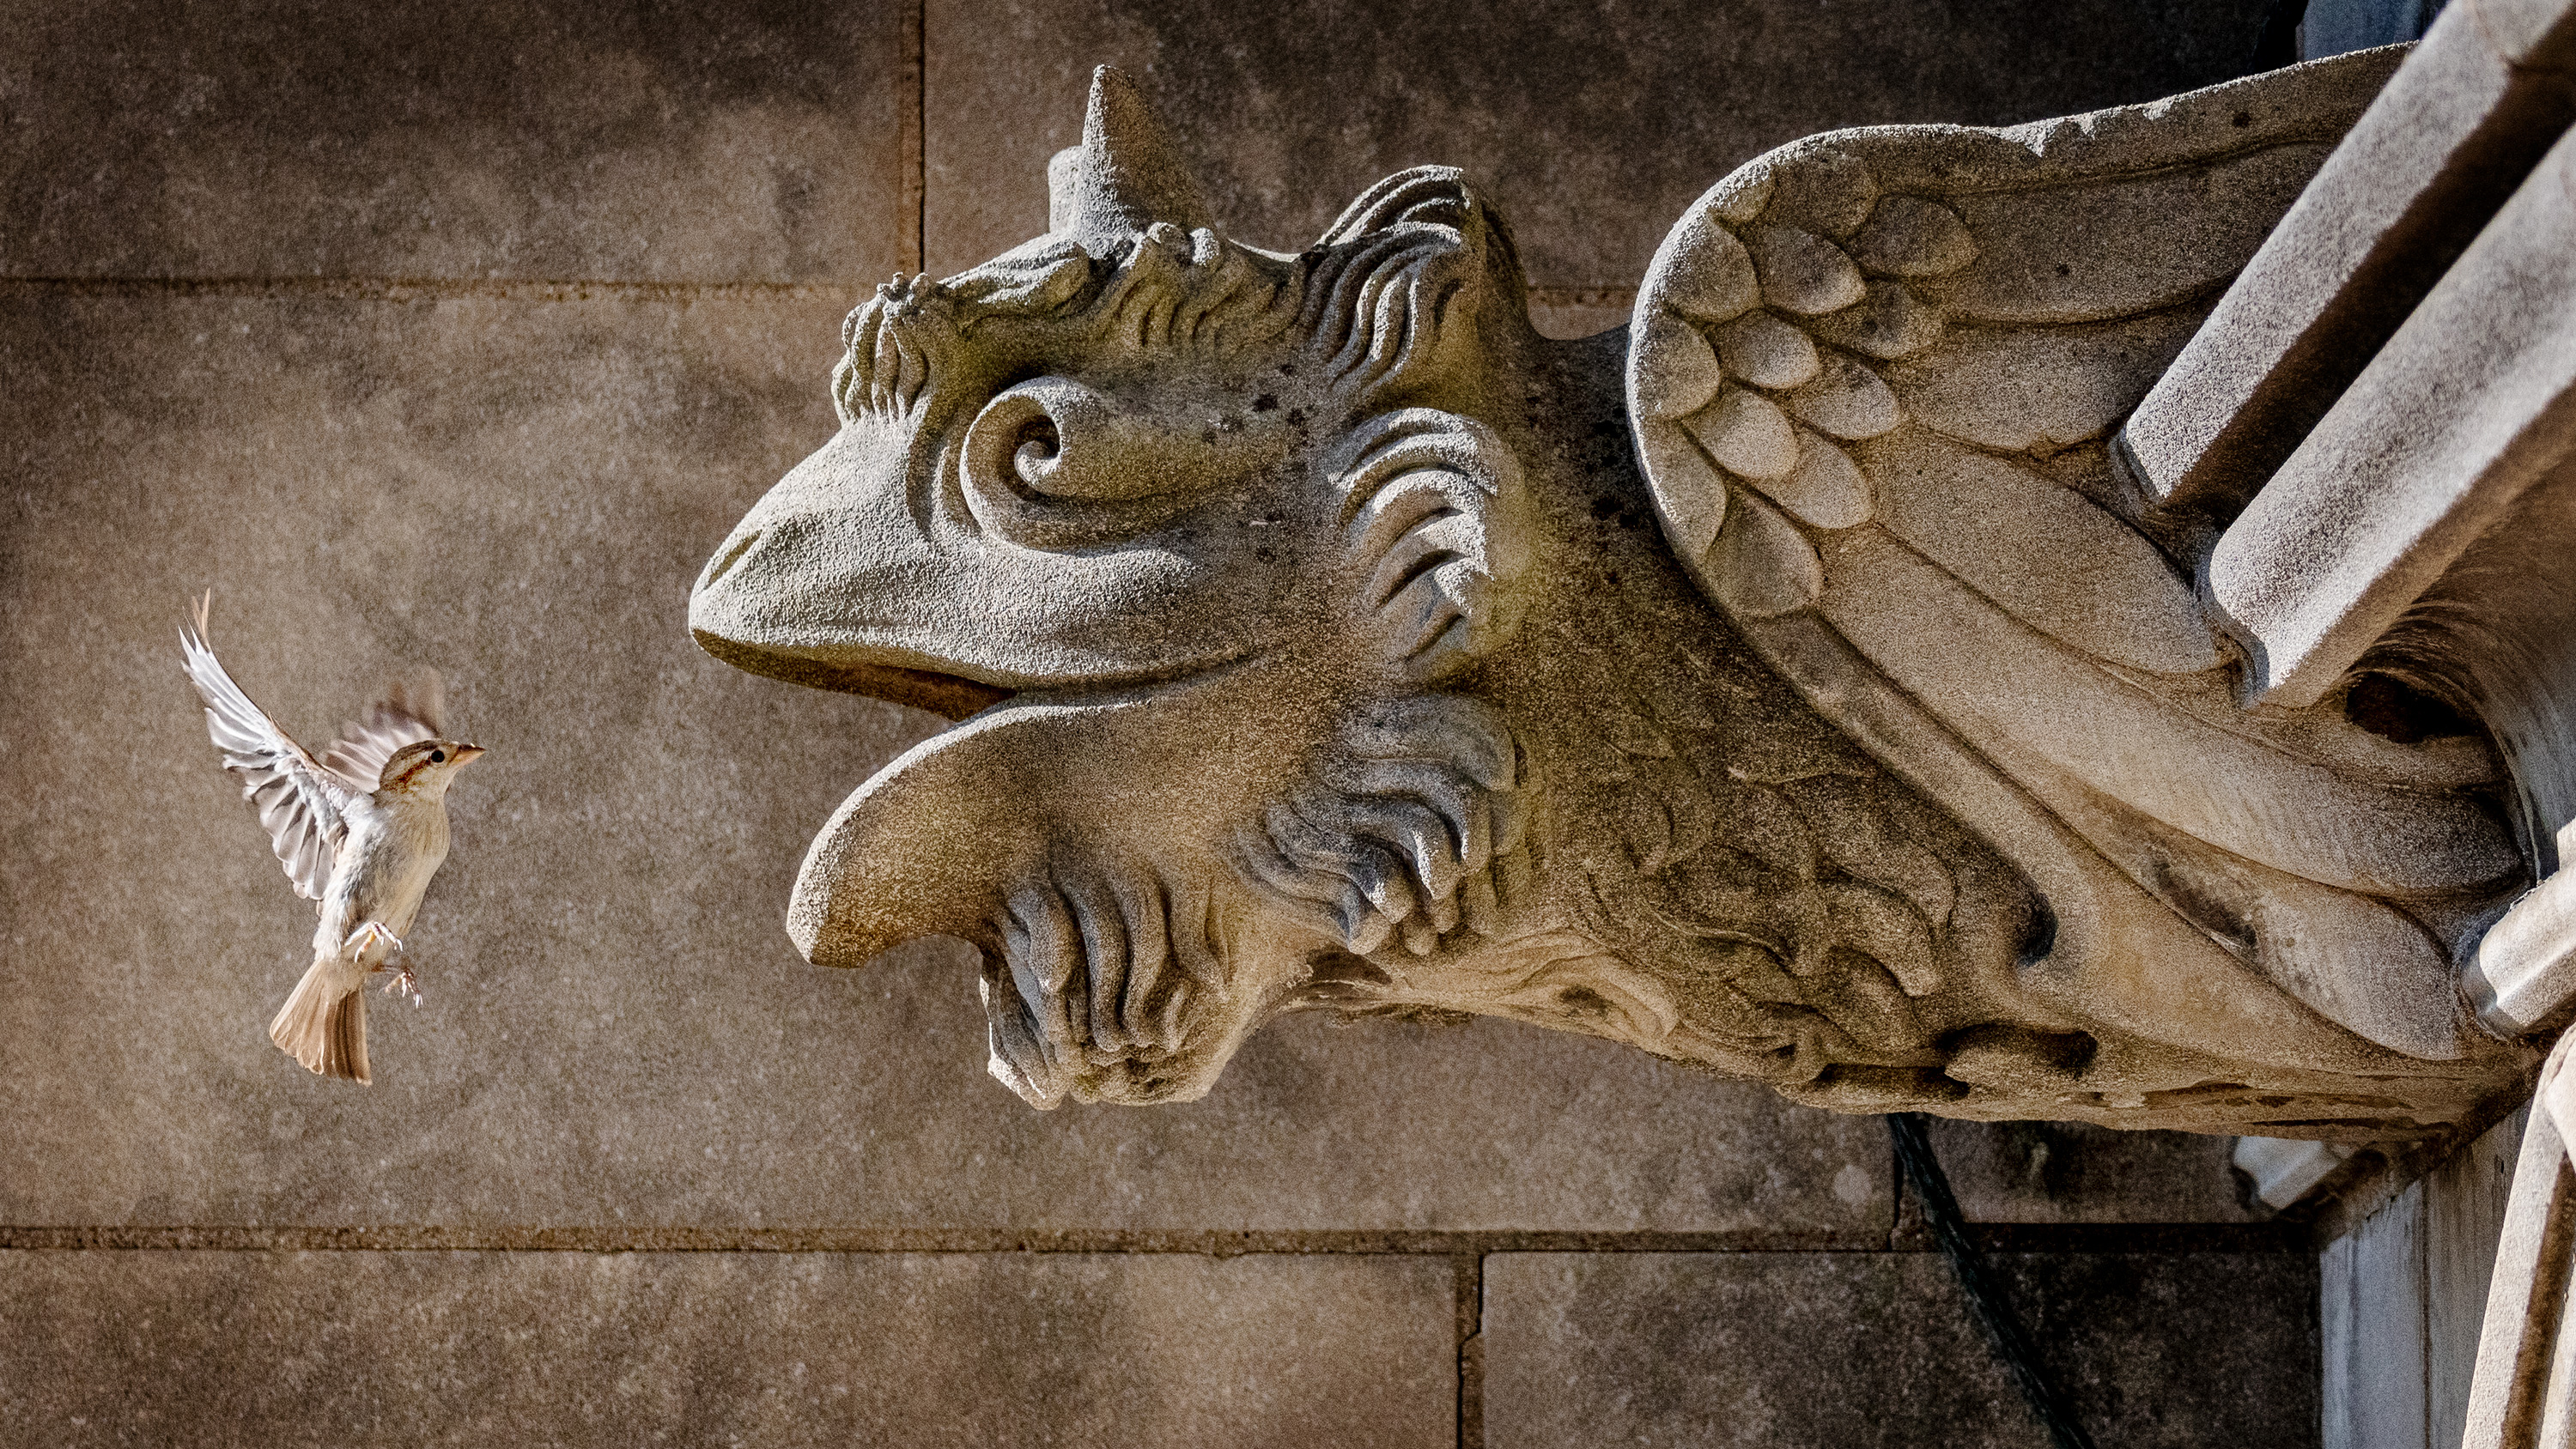 Gargoyle on the Washington National Cathedral in Washington DC. Download a zipped file of promotional materials in the Additional Assets section below.